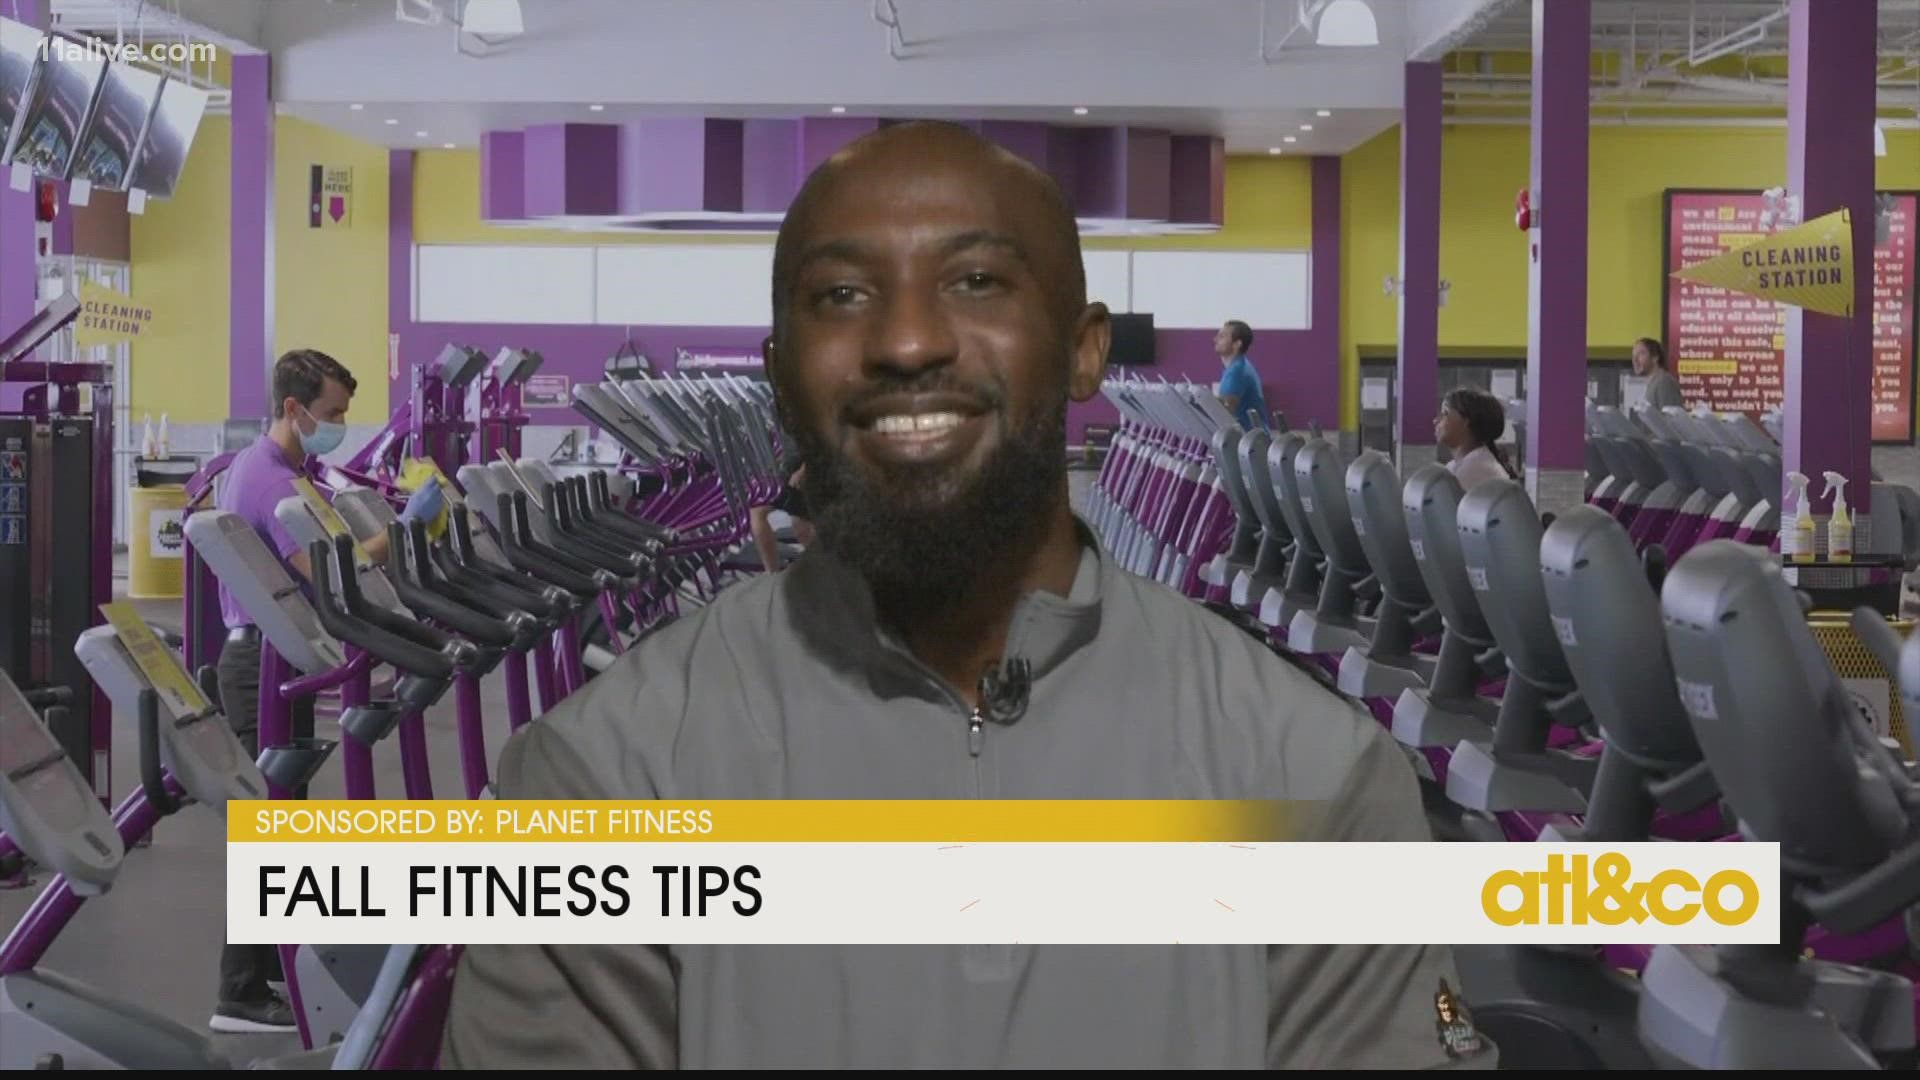 Planet Fitness shares how you can get that workout in and take back control of those healthy routines.